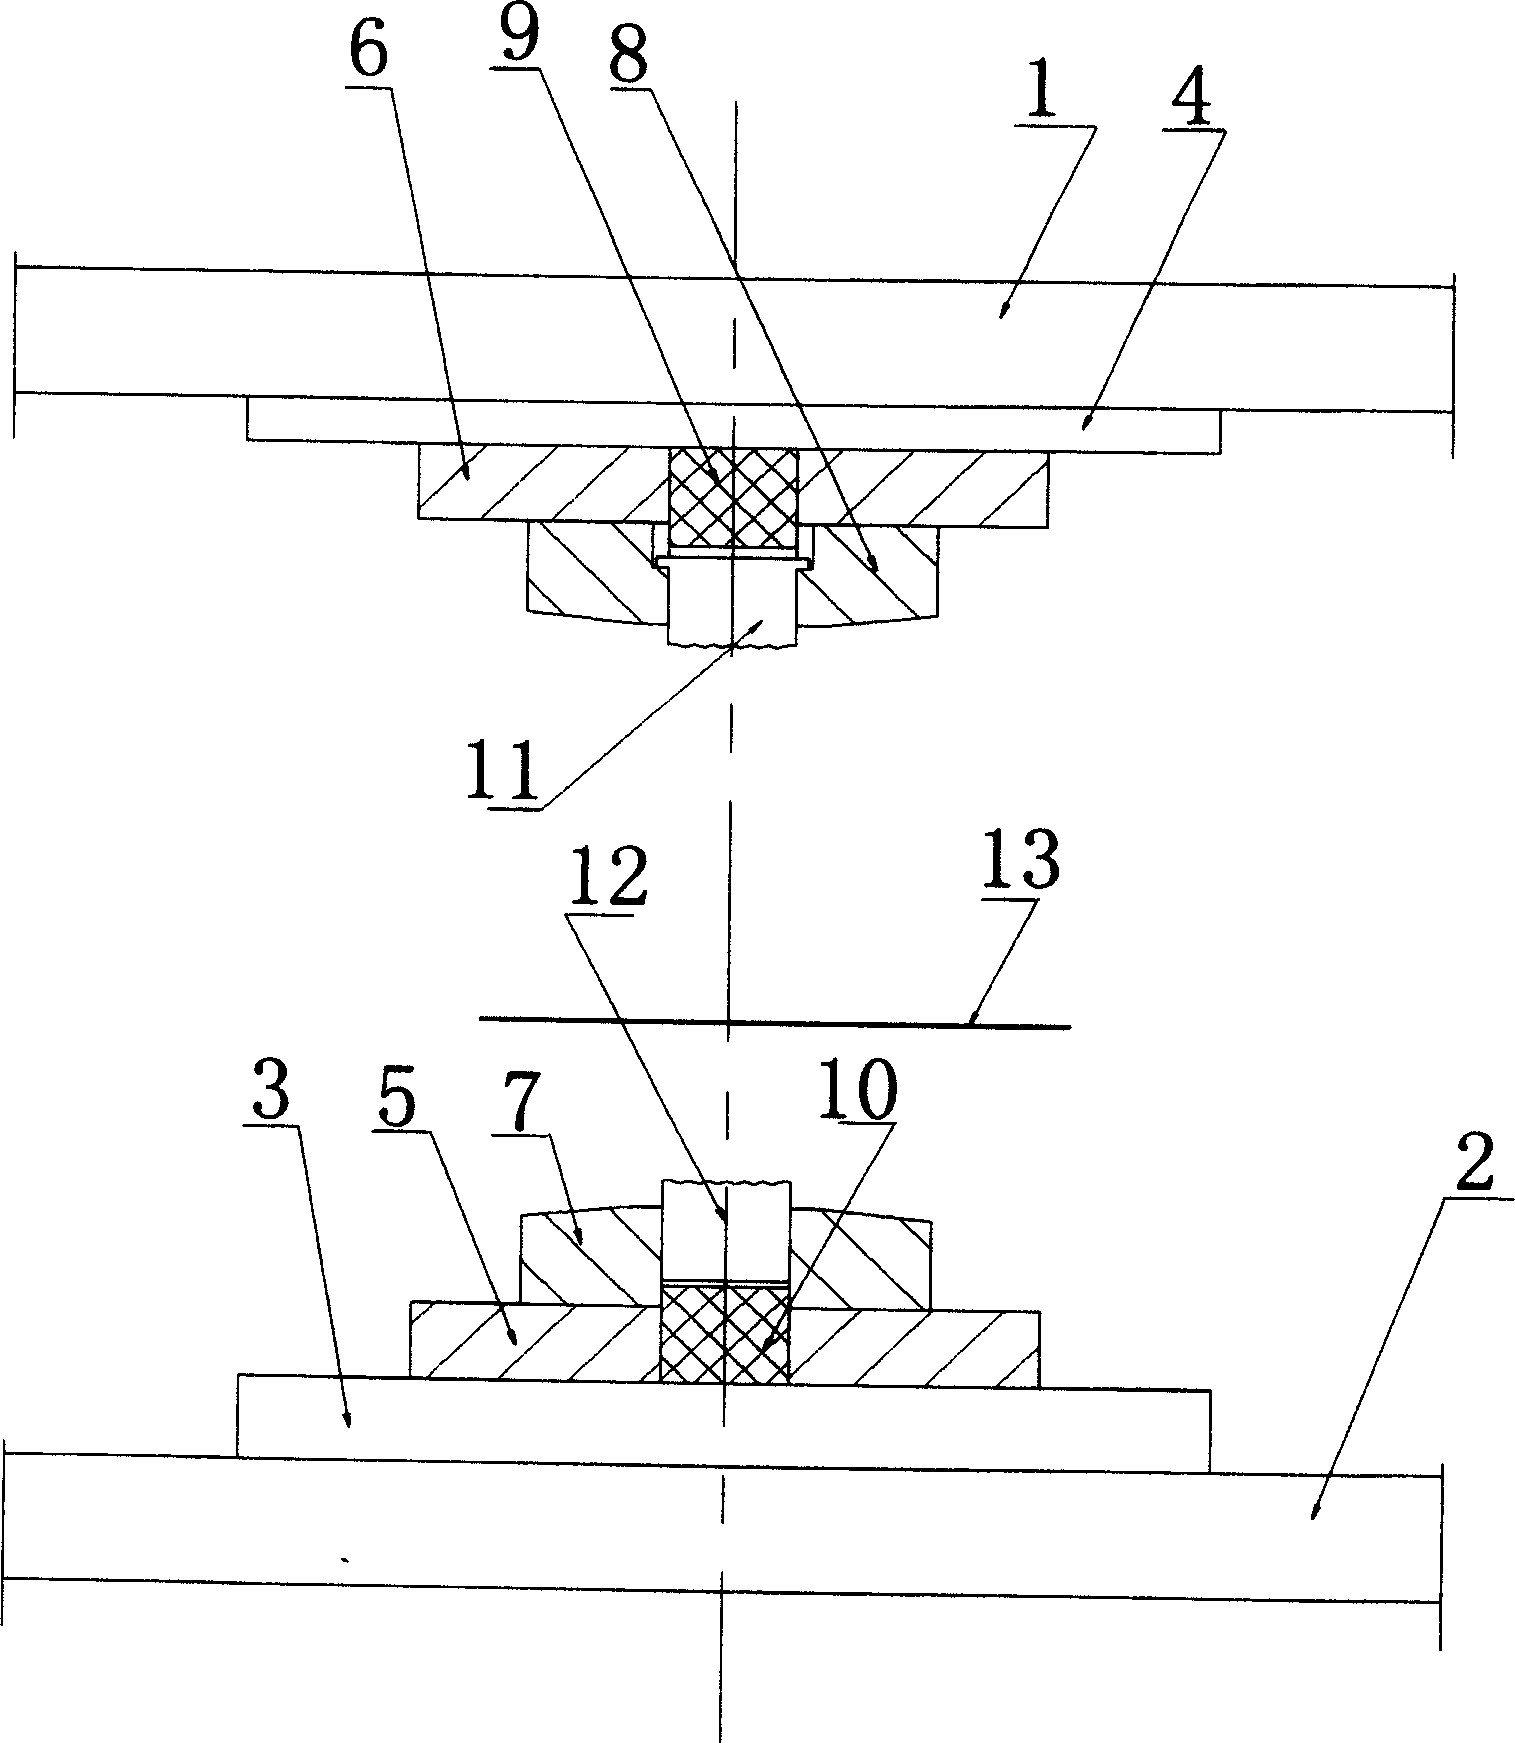 Equipment and method for pressing fine wave rib at end of waveform plate